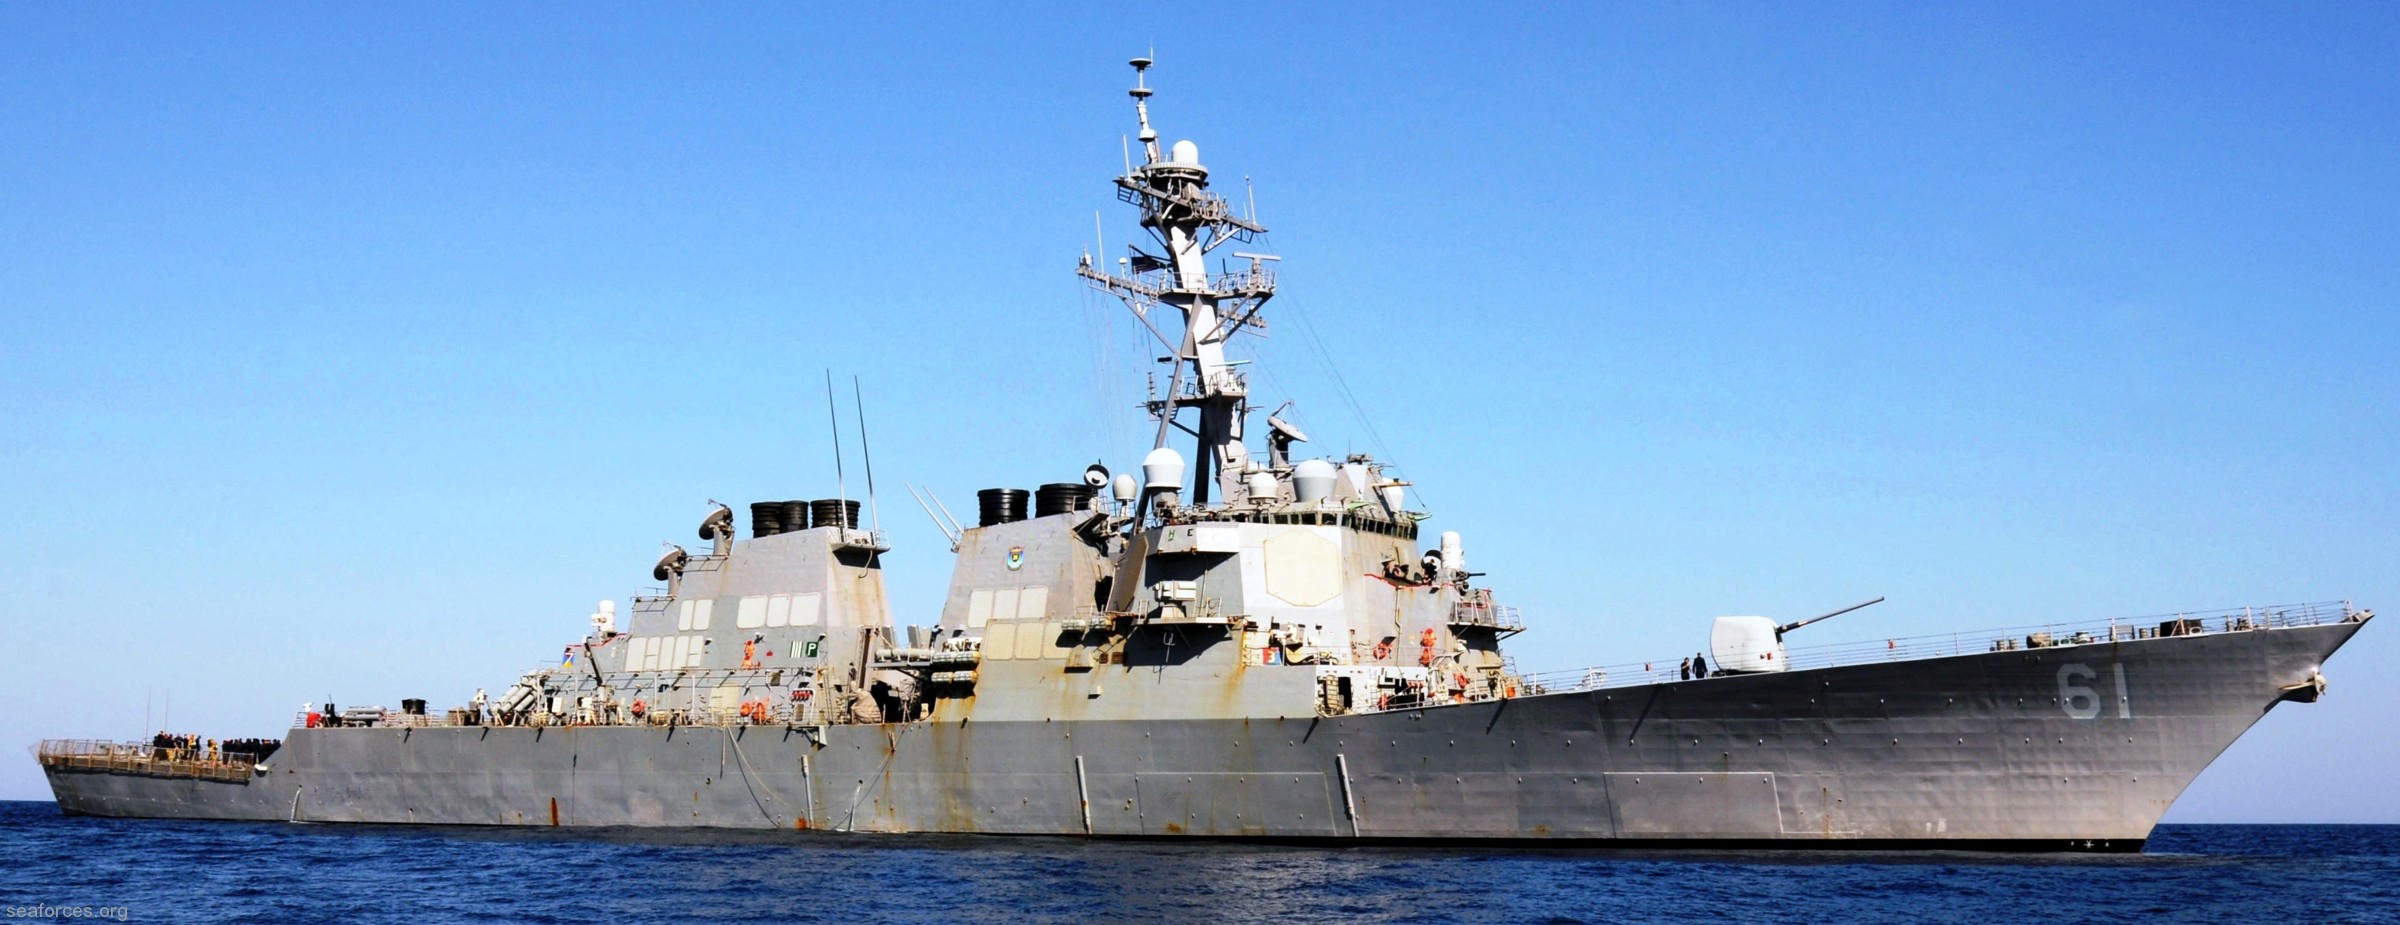 ddg-61 uss ramage guided missile destroyer us navy 84